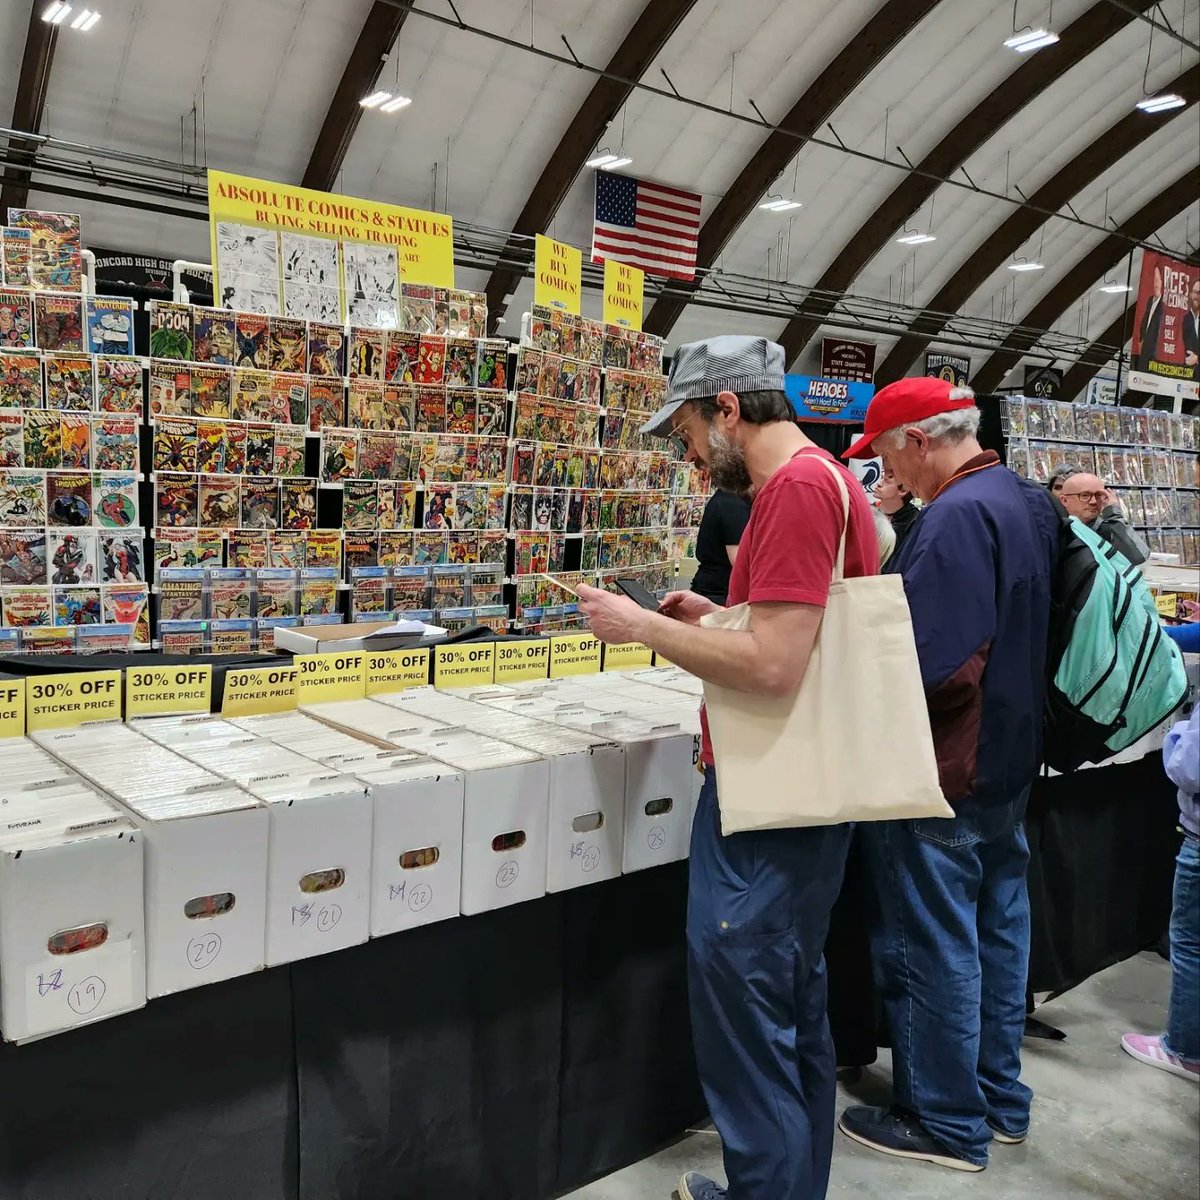 We wanted to thank everyone who stopped by our booth at the Little Giant Comics show today!

#comics #comicbooks #cgccomics #cgc #comicartwork #littlegiantcomics #littlegiant #oldschoolcomicshow #comicshow #comicconvention #comiccon #spiderman #hulk #avengers #xmen #fantasticfour